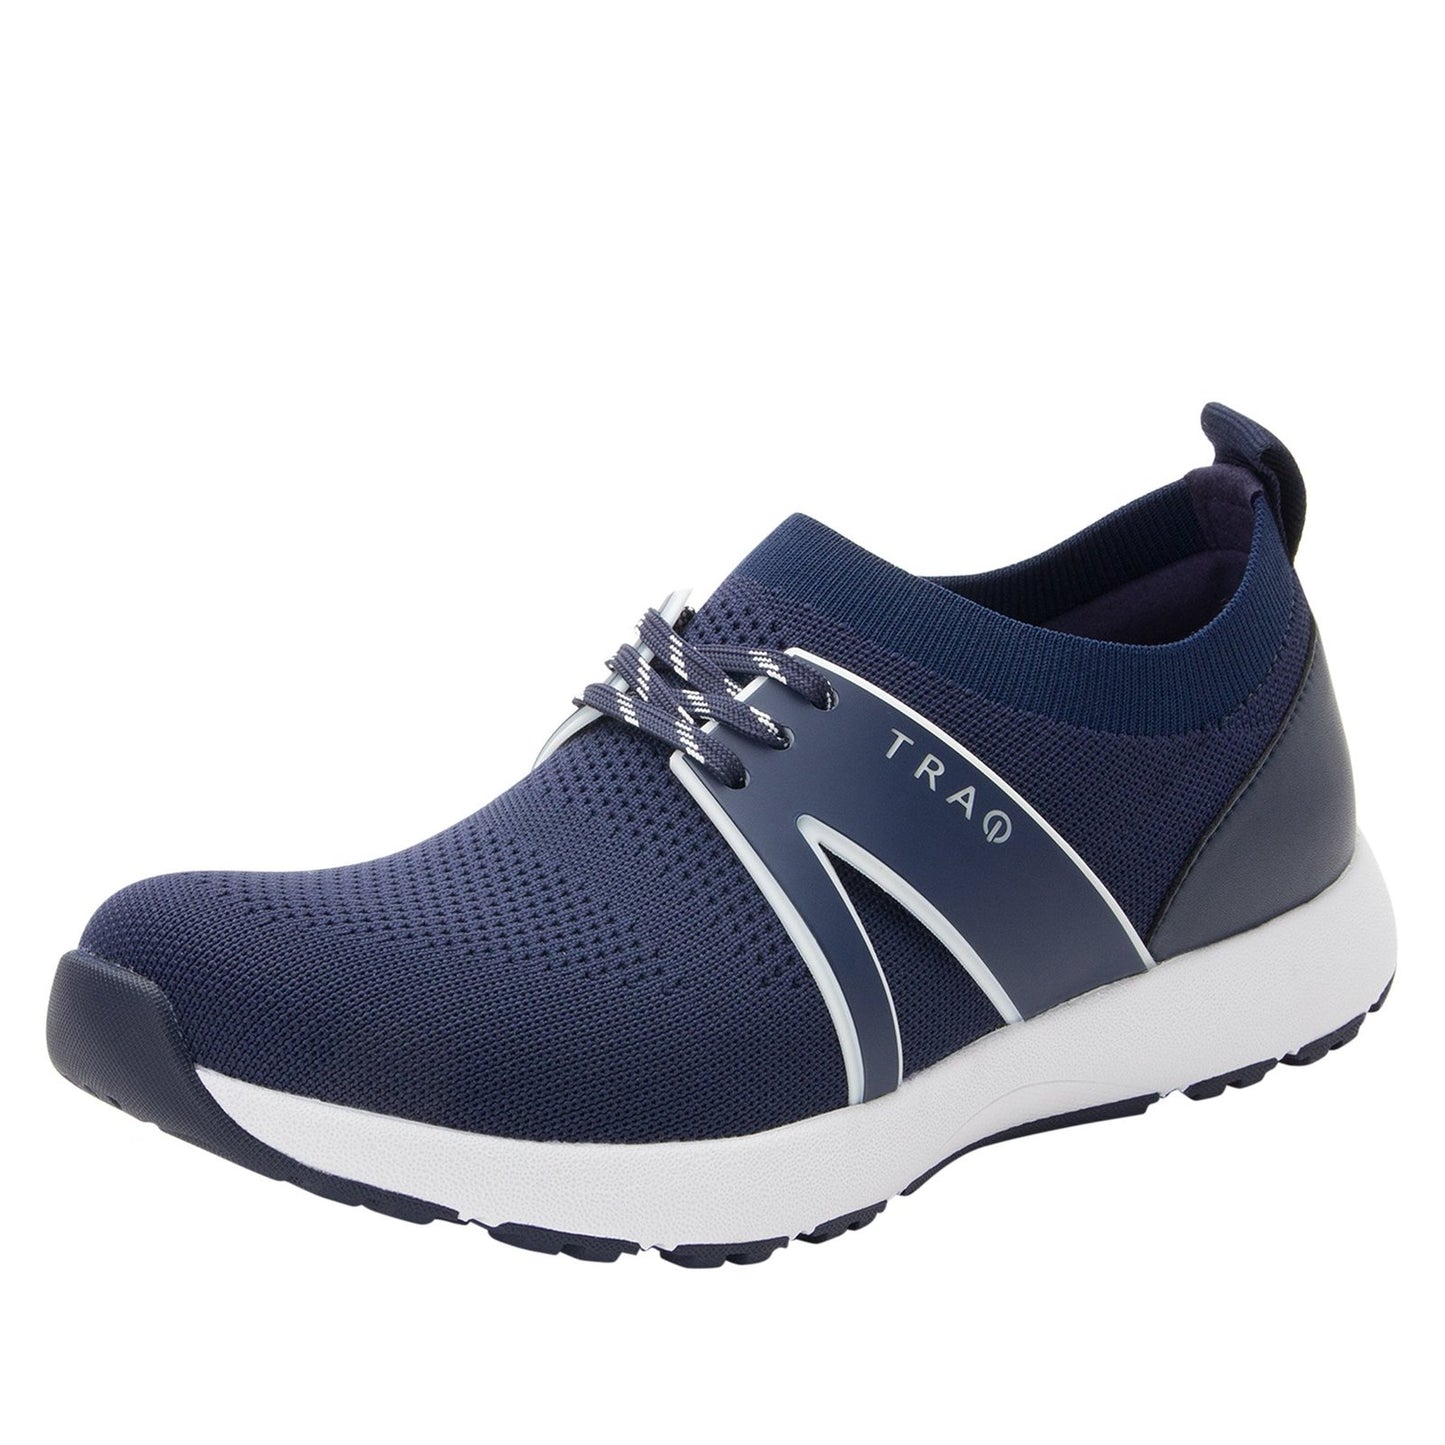 Traq Qool by Alegria in Navy at Parker's Clothing and Shoes.